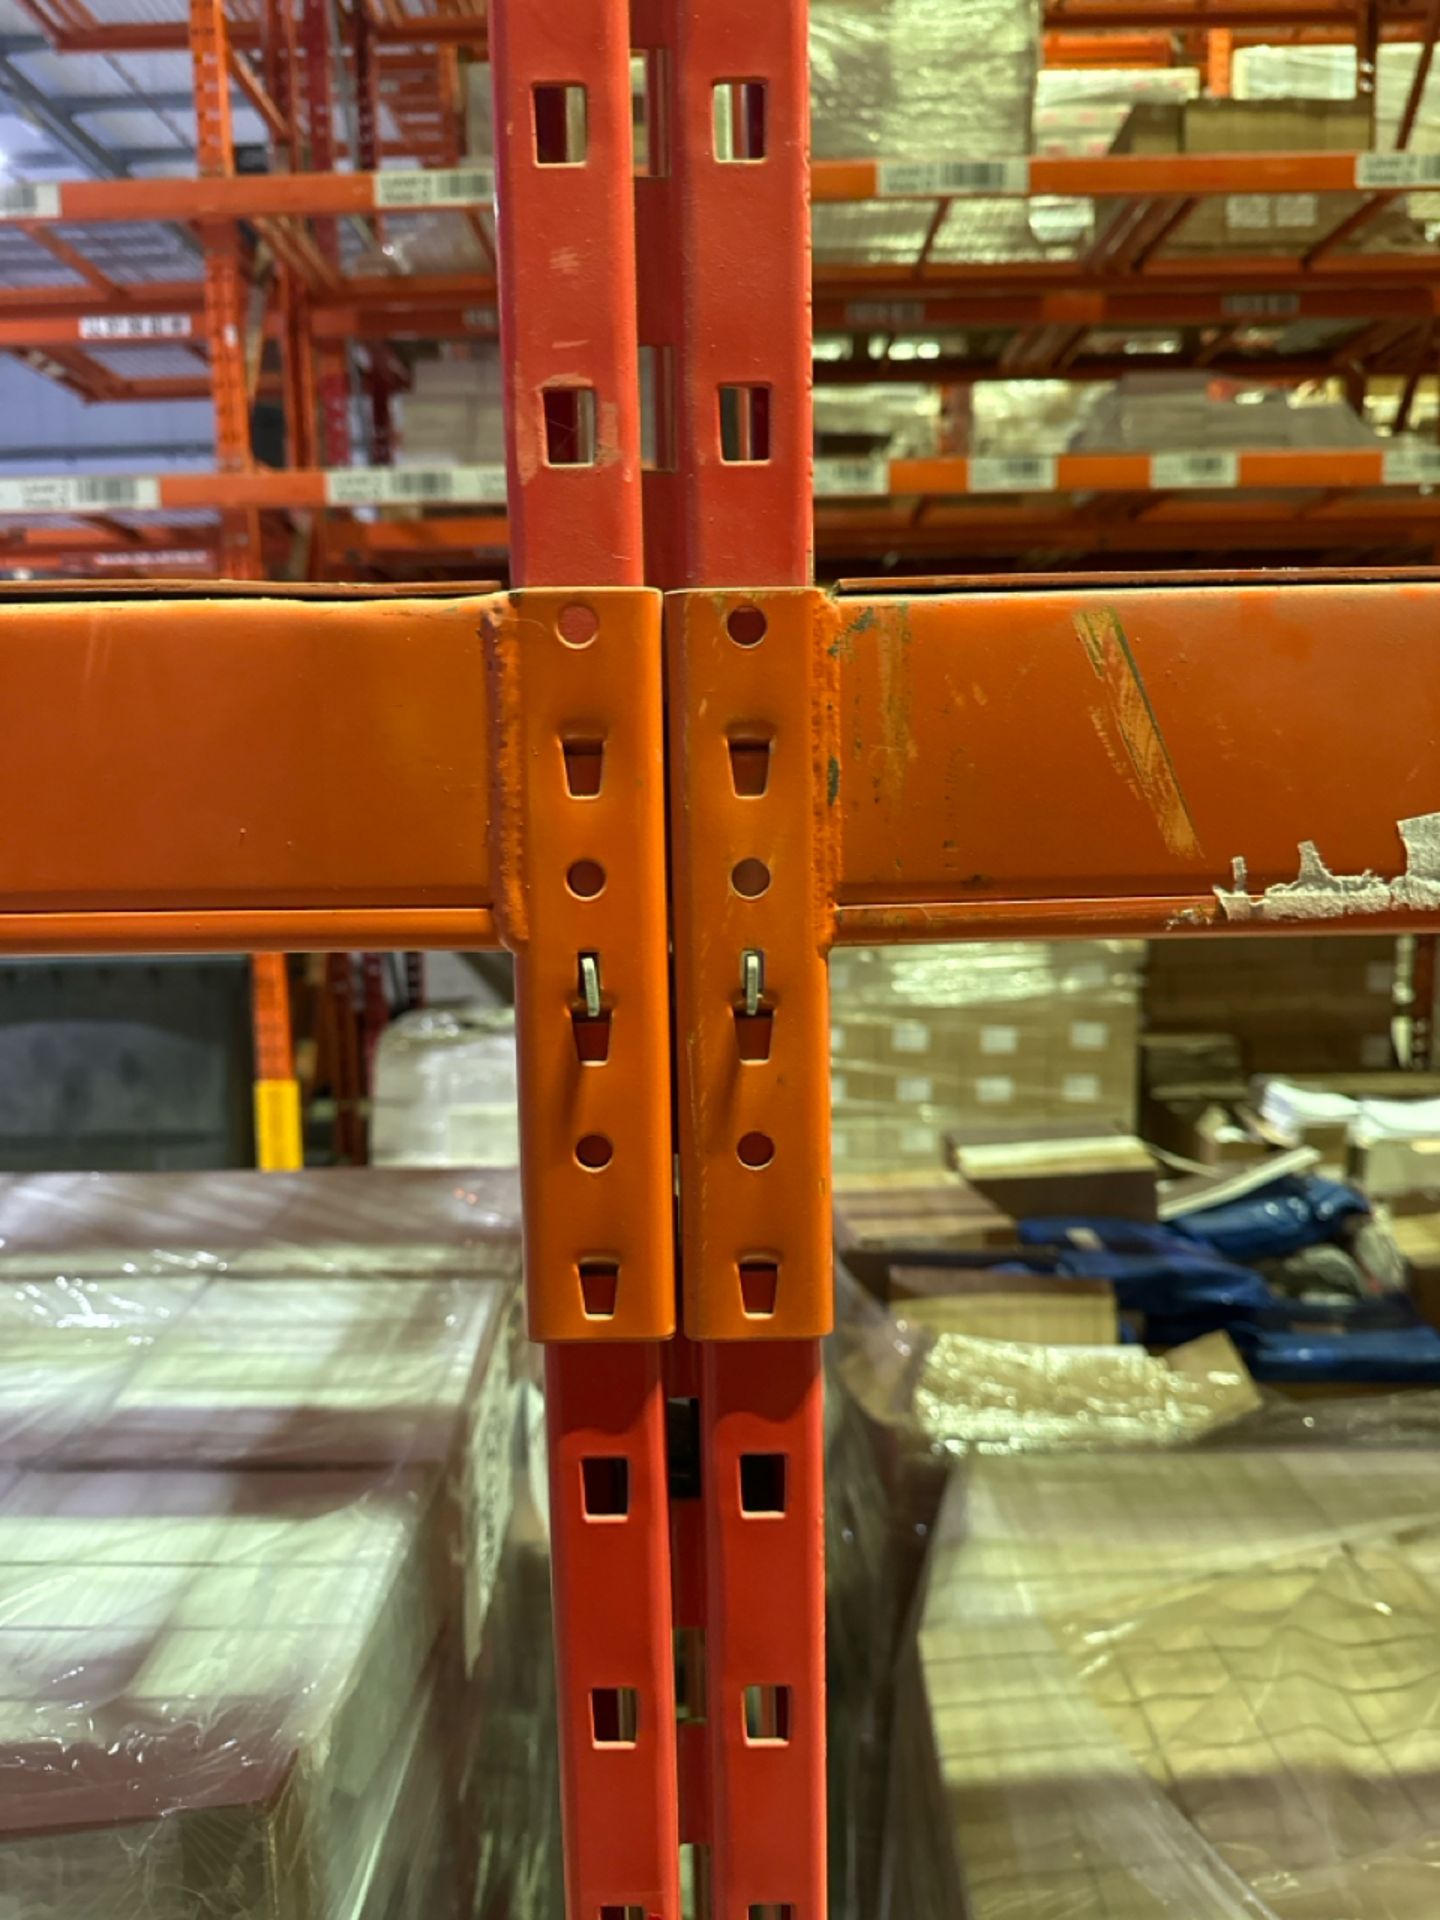 11 Bays Of Boltless Pallet Racking - Image 6 of 11